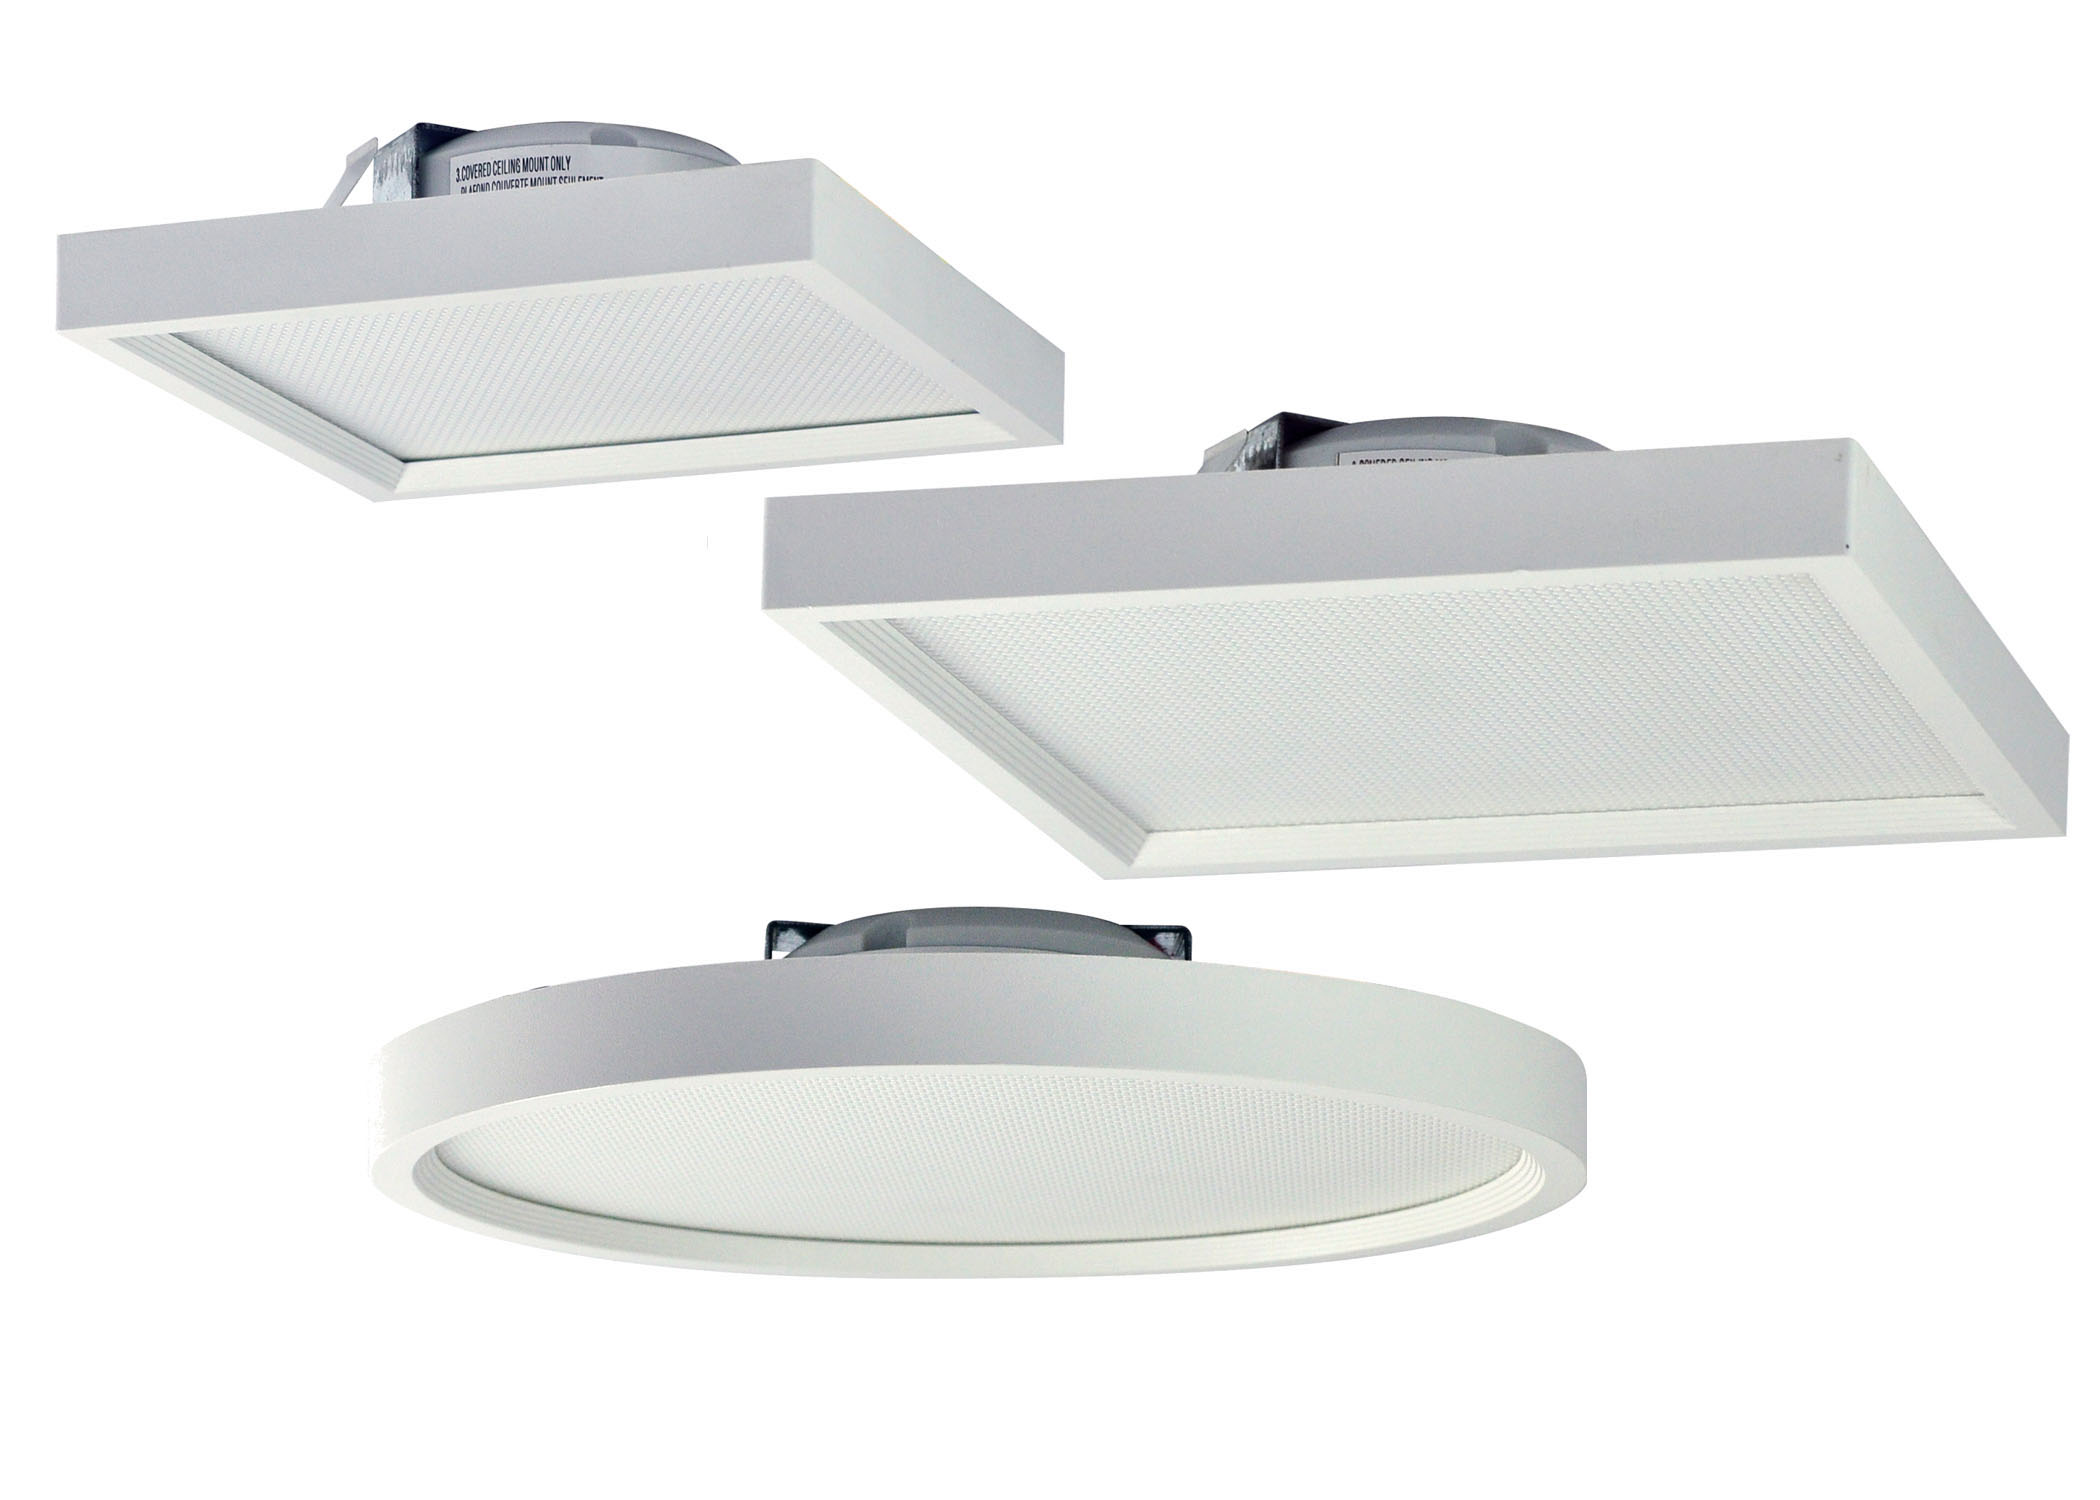 The slim-line Surf LED surface-mount ceiling fixture from Nora Lighting